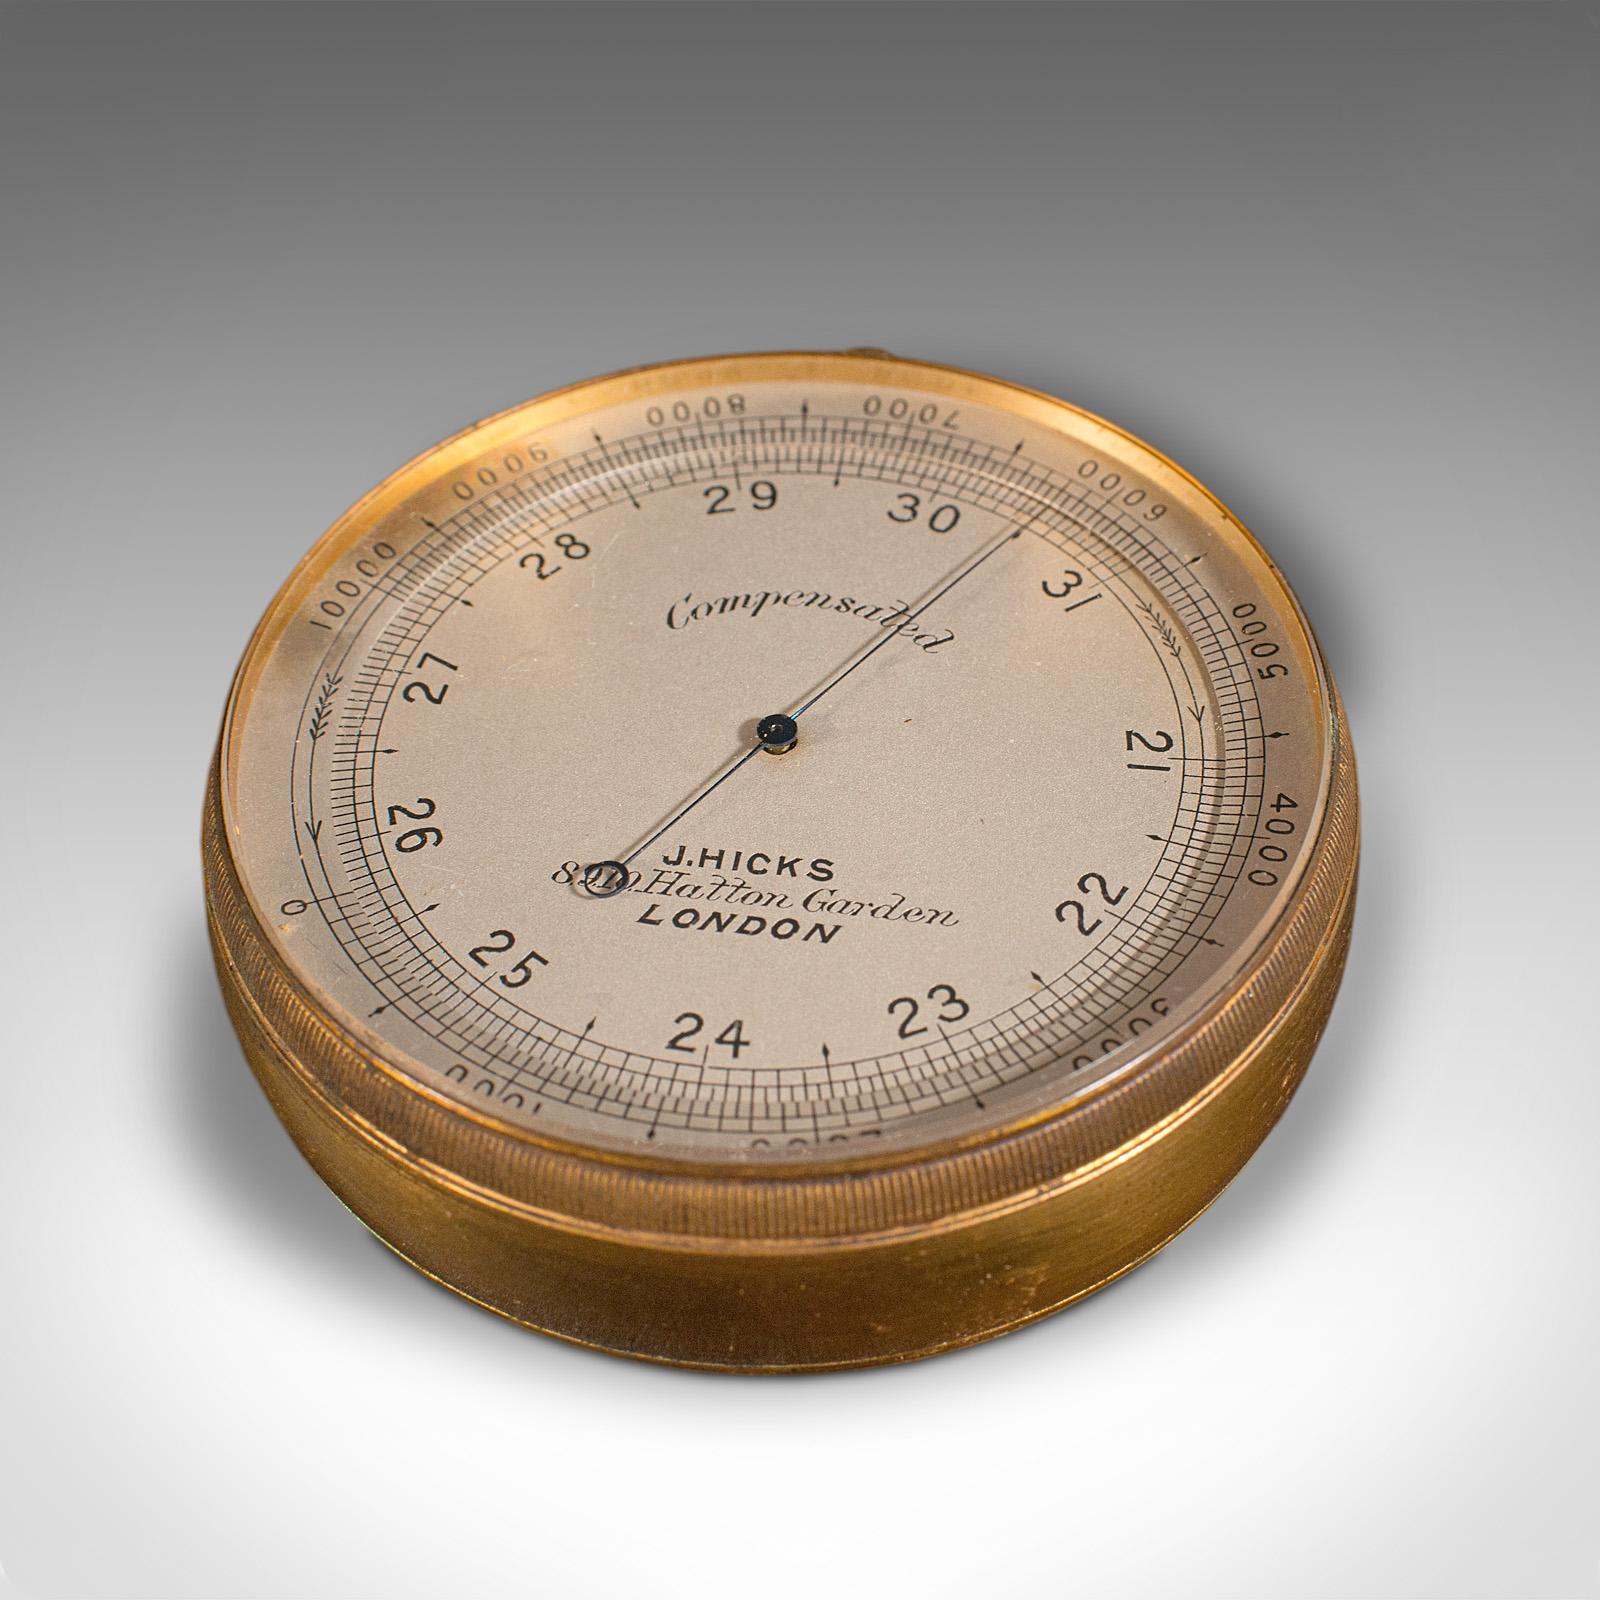 This is an antique pocket barometer altimeter. An English, oak cased explorer's instrument by Hicks of London, dating to the late Victorian period, circa 1890.

Delightful example of antique hiking or mountaineering interest
Displays a desirable